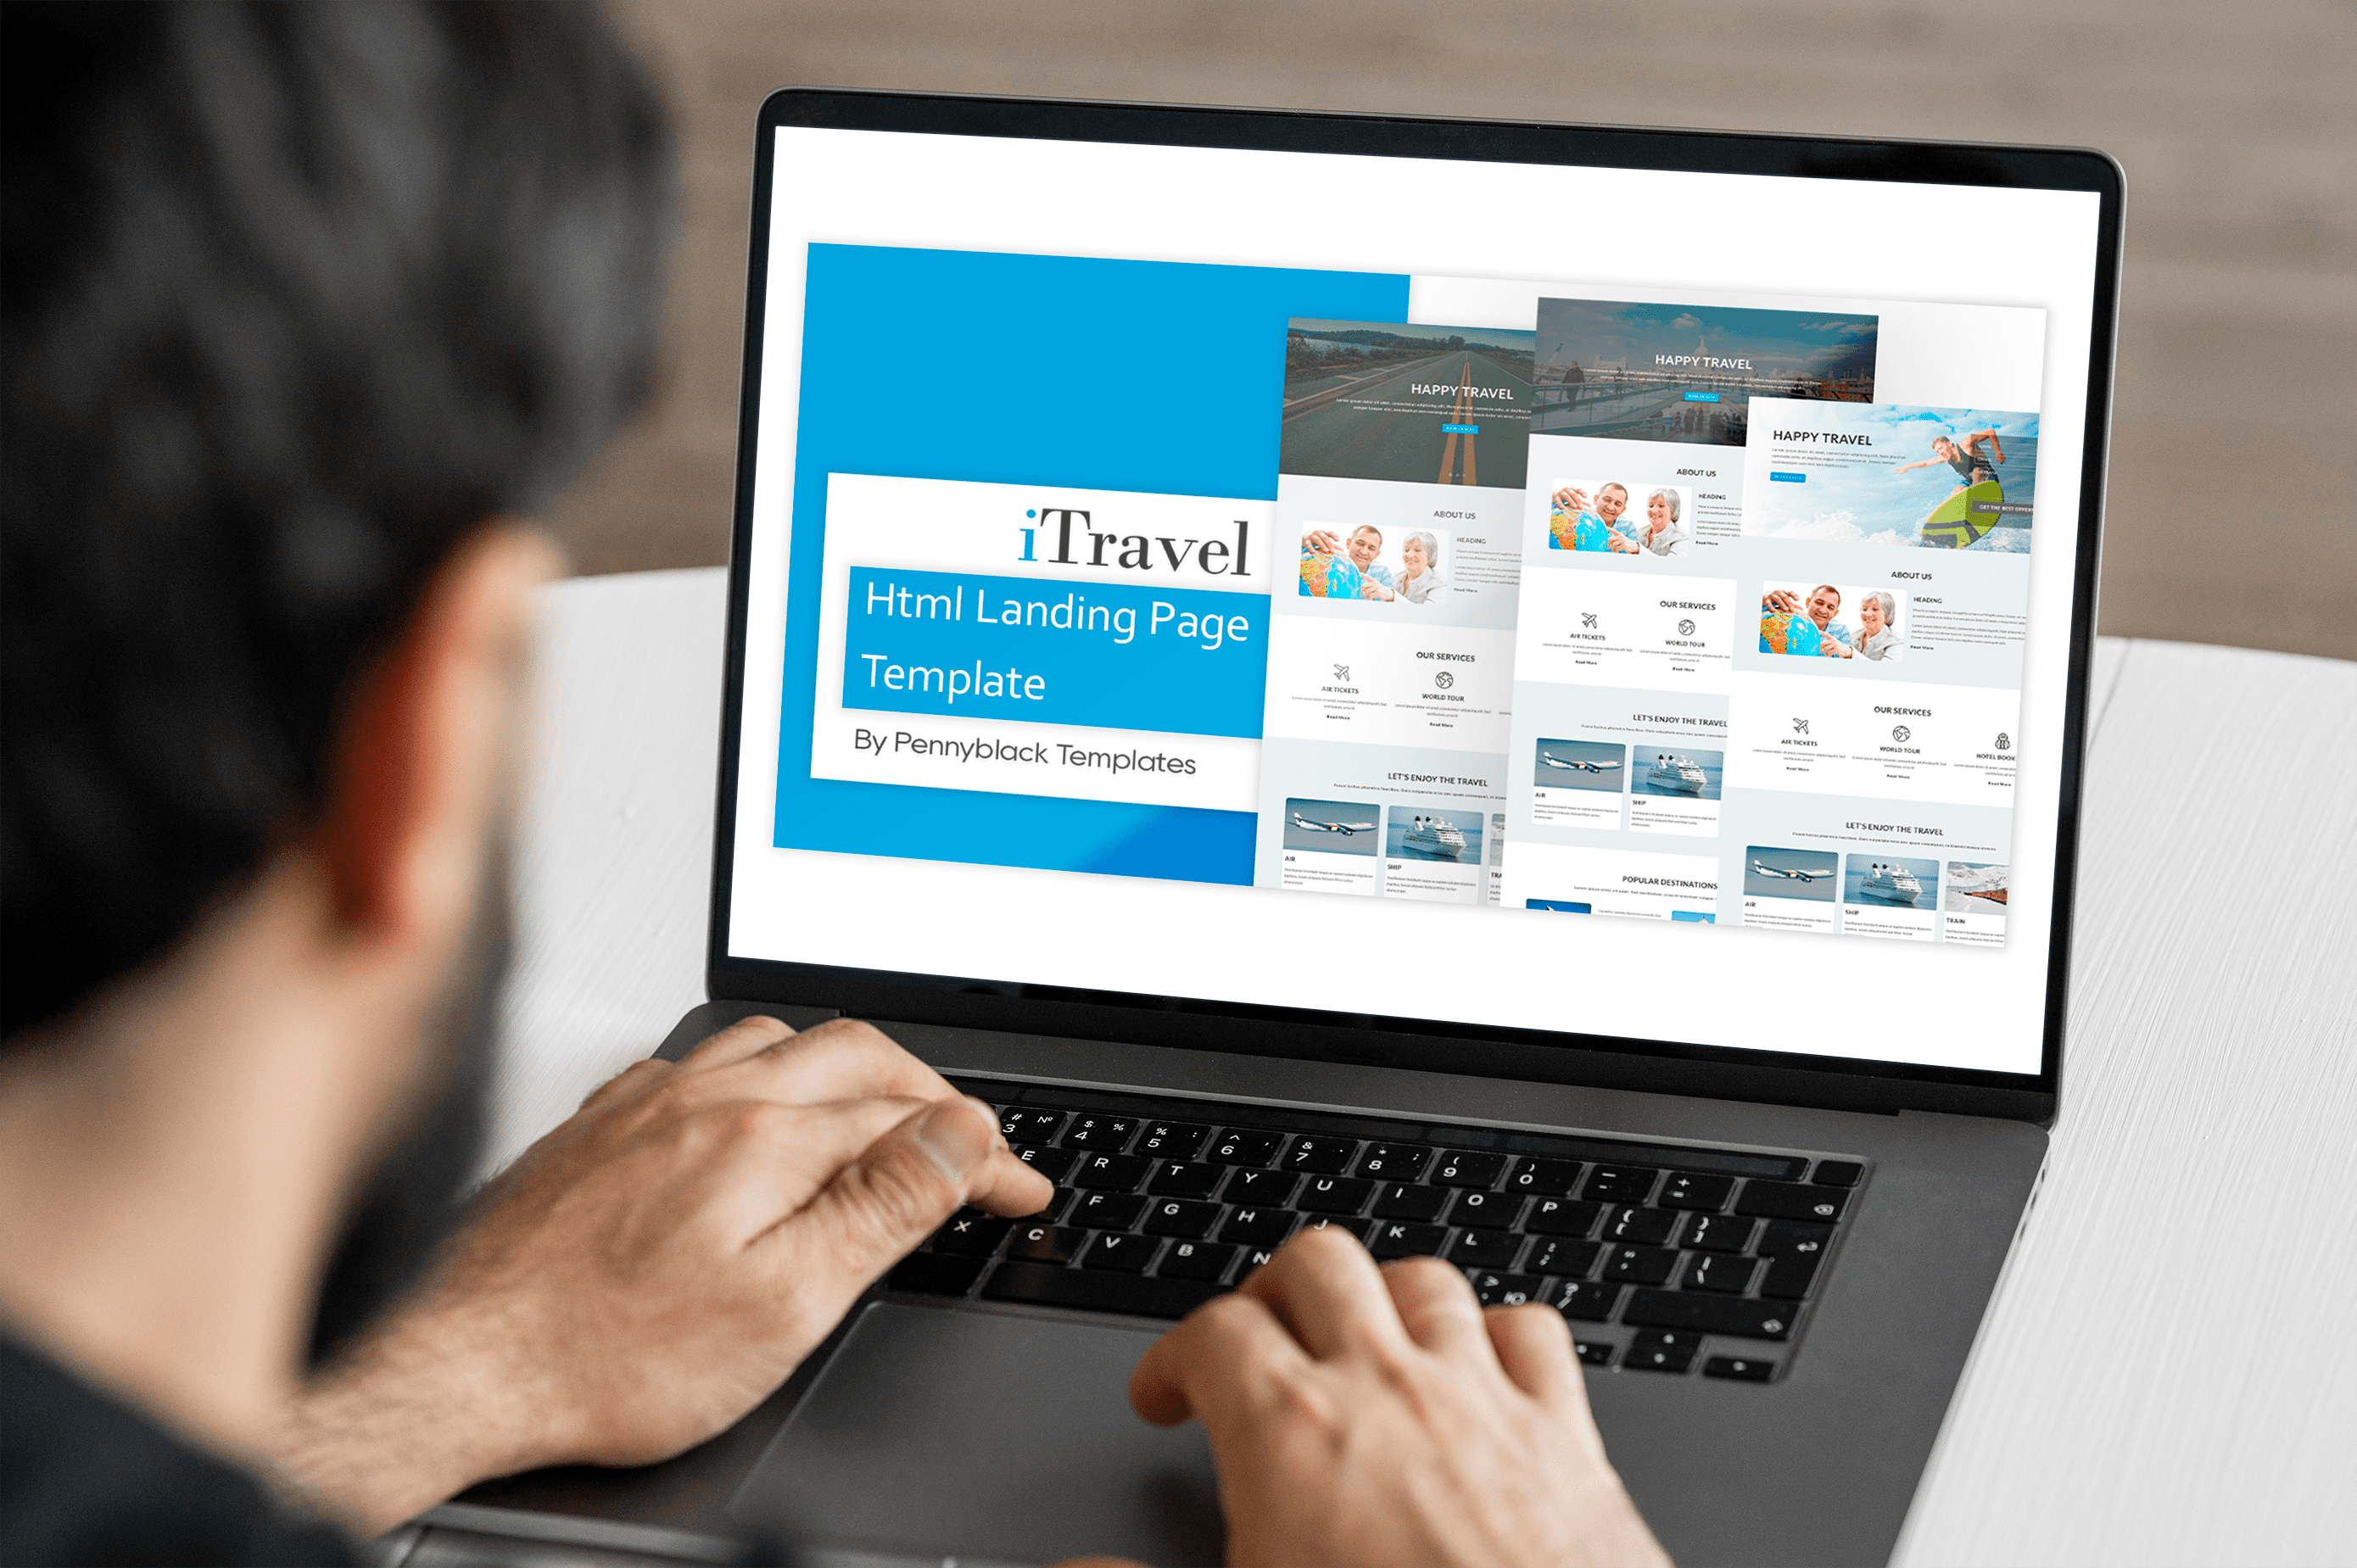 iTravel - Html Landing Page Template - laptop.